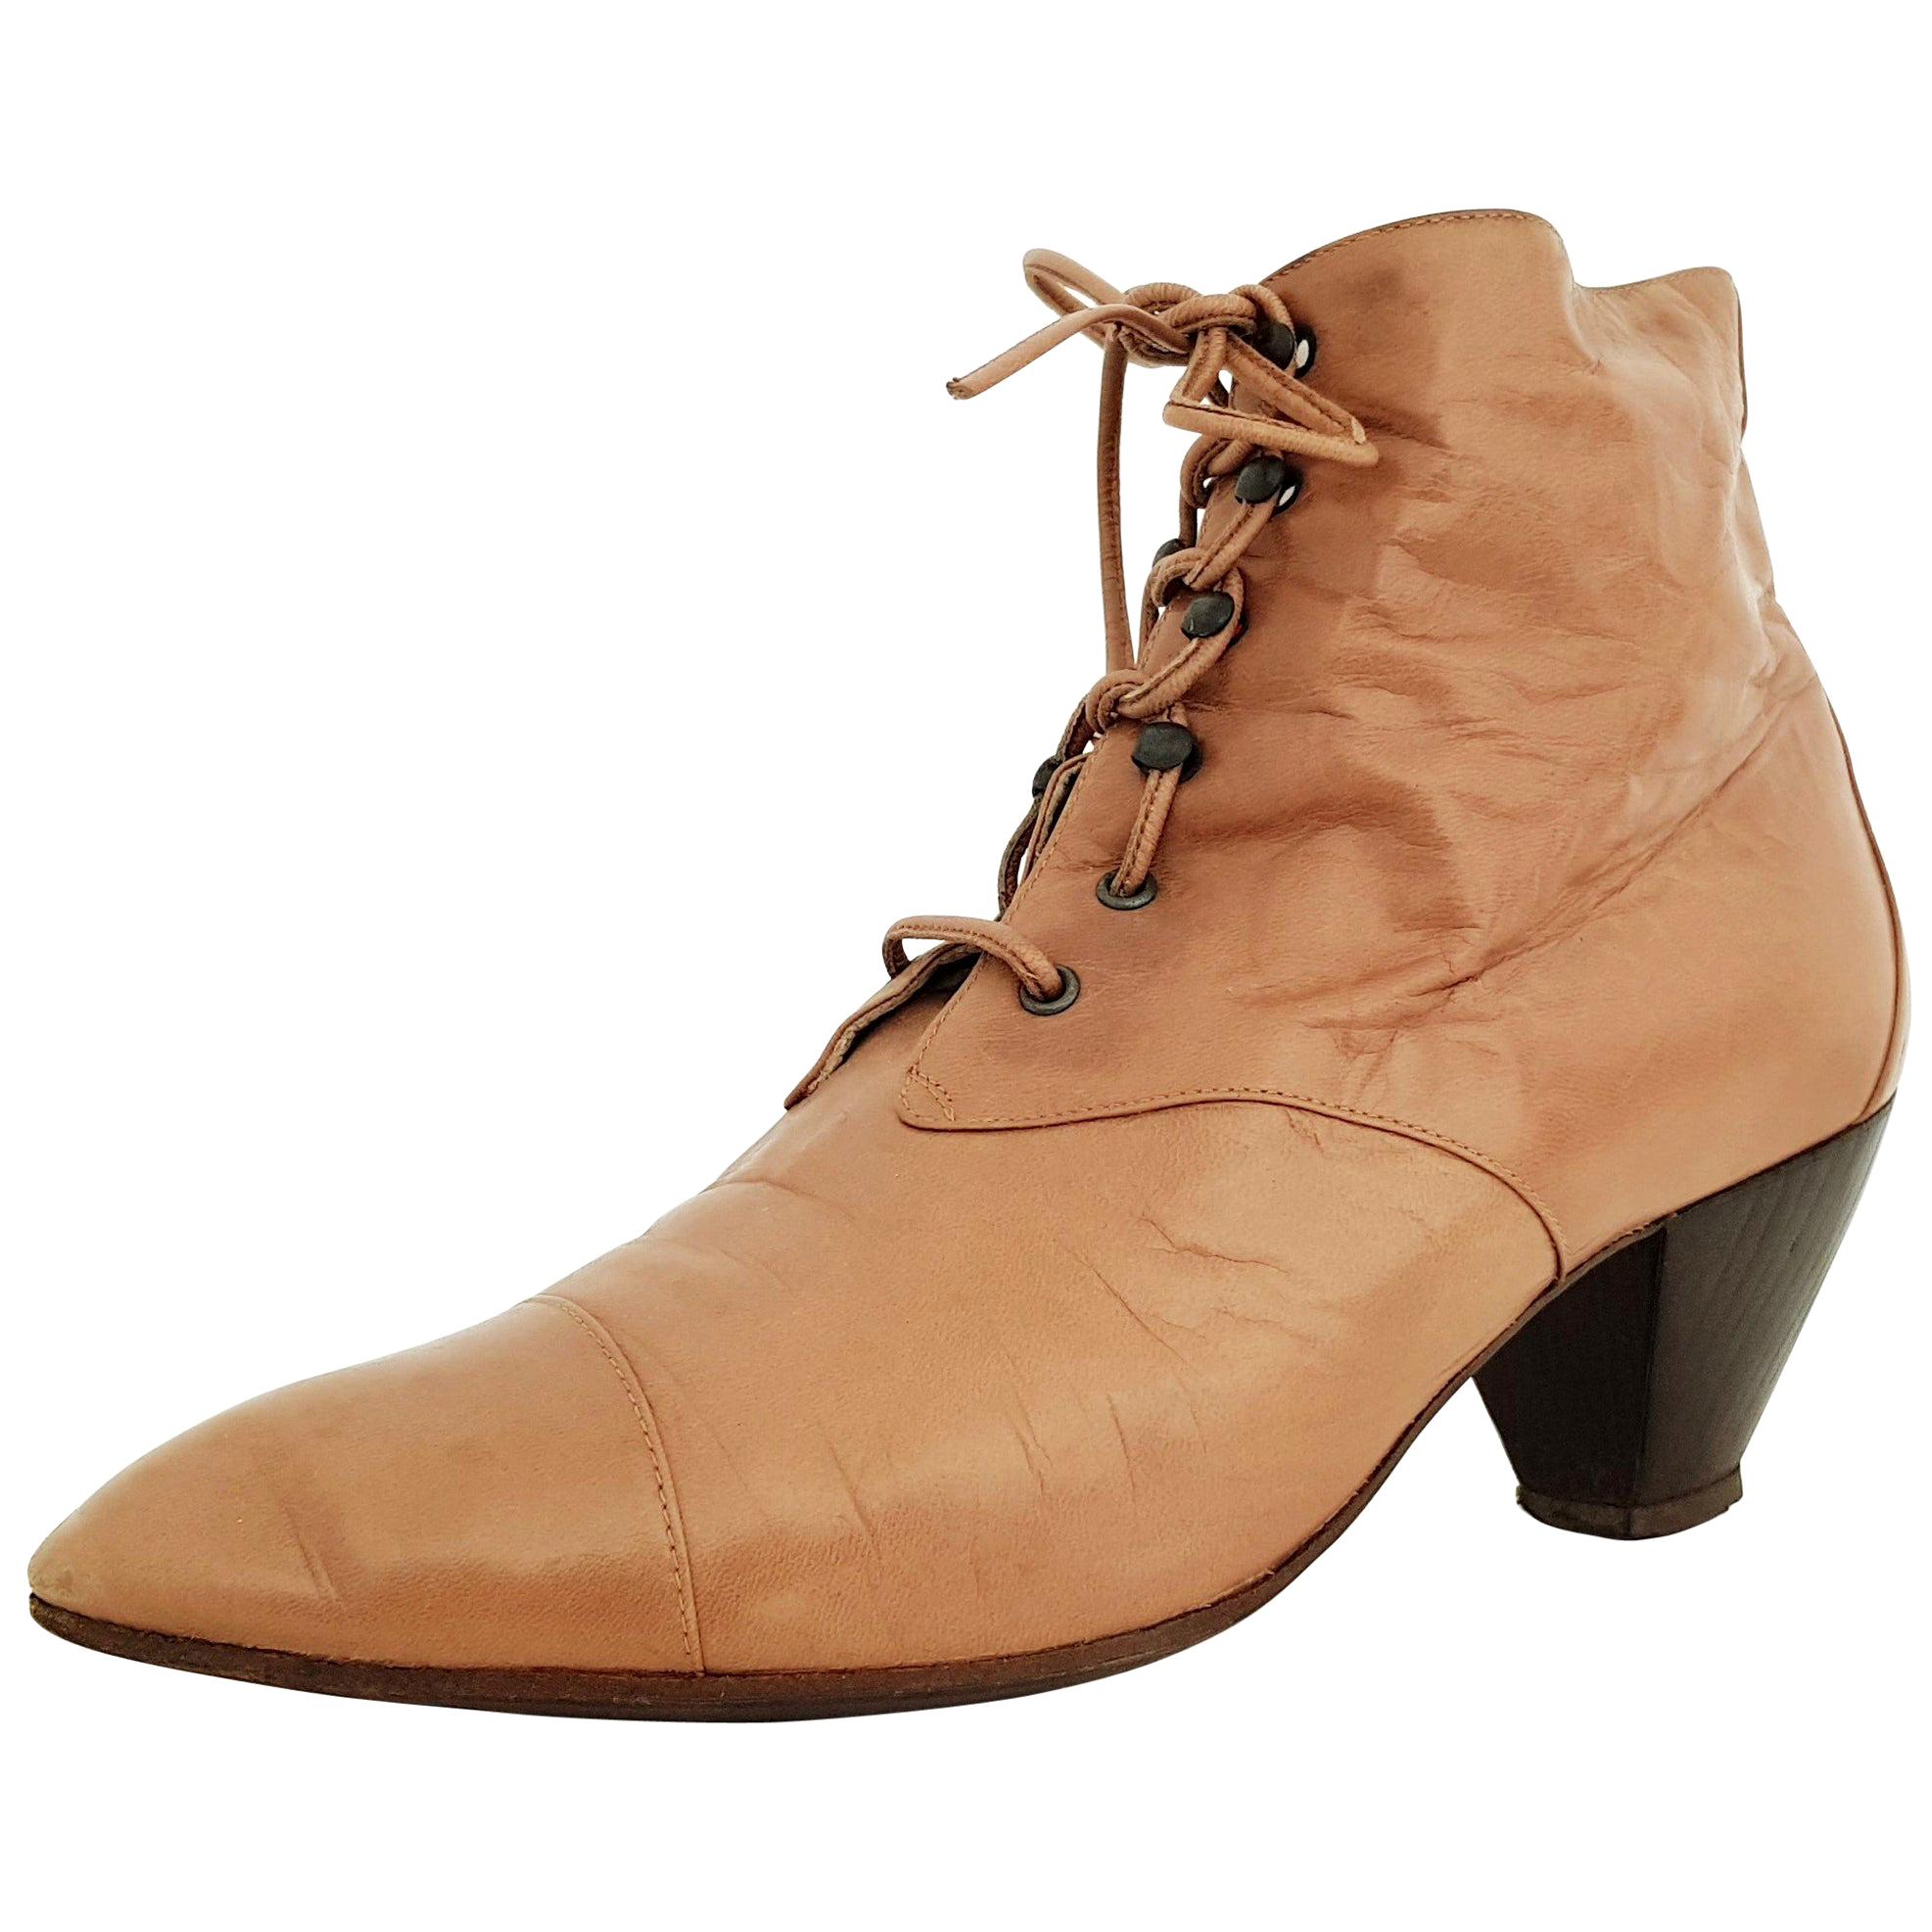 Maud Frizon Leather Ankle Heeled Boots With Wooden Sole - Size 39 1/2 (EU) For Sale